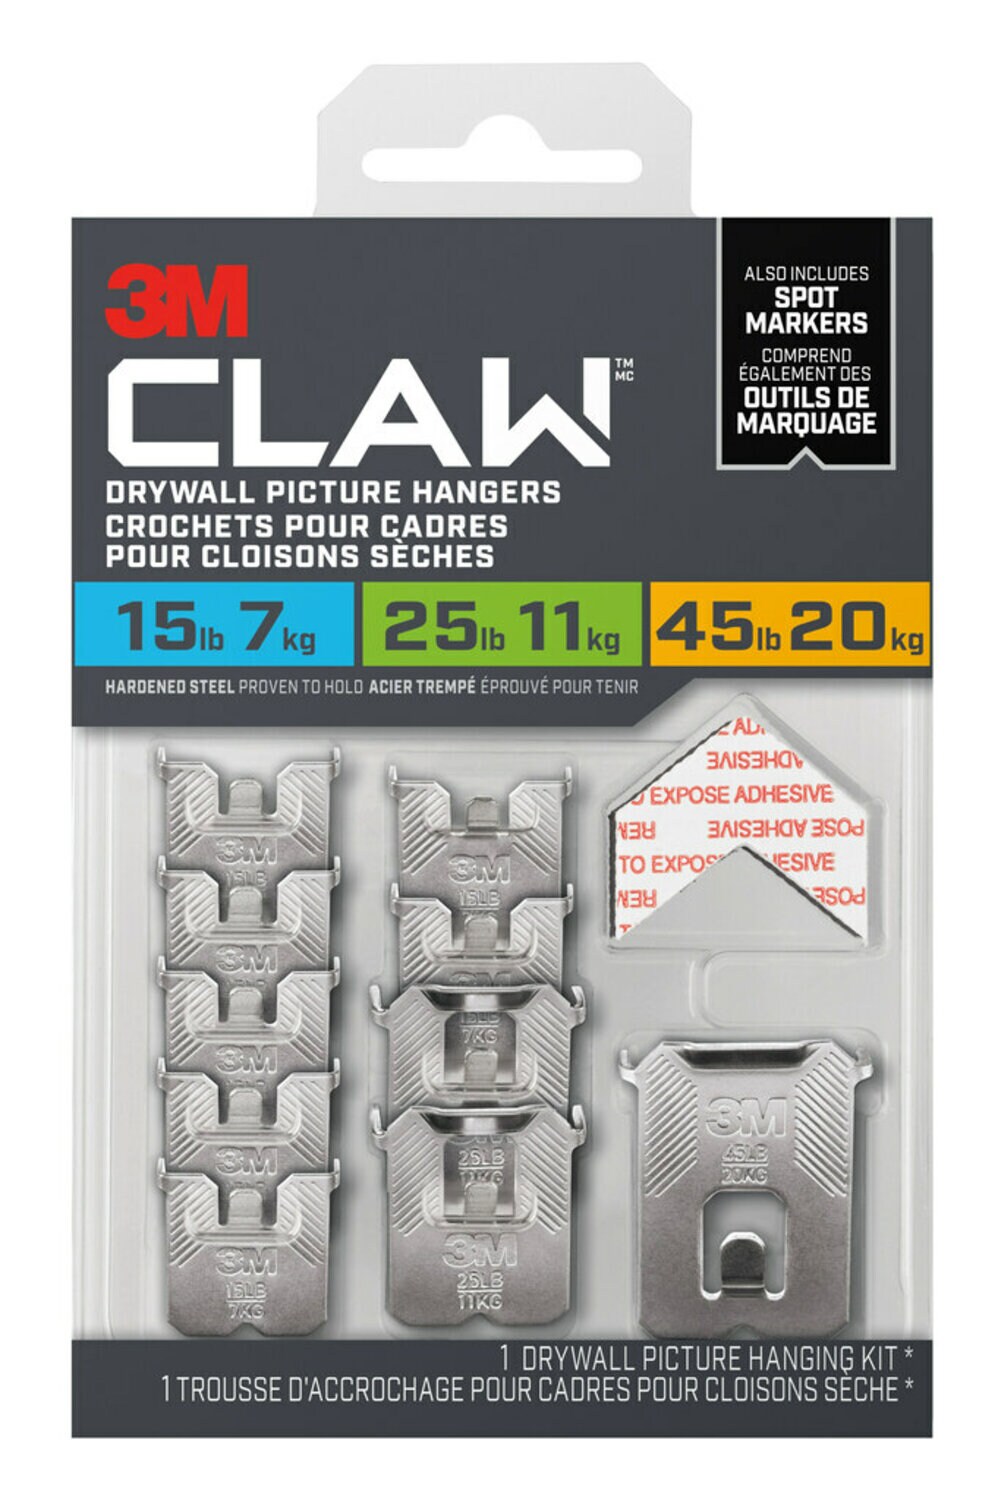 7100248593 - 3M CLAW Drywall Picture Hanger Variety Pack with Spot Markers 3PHKITM-10EF